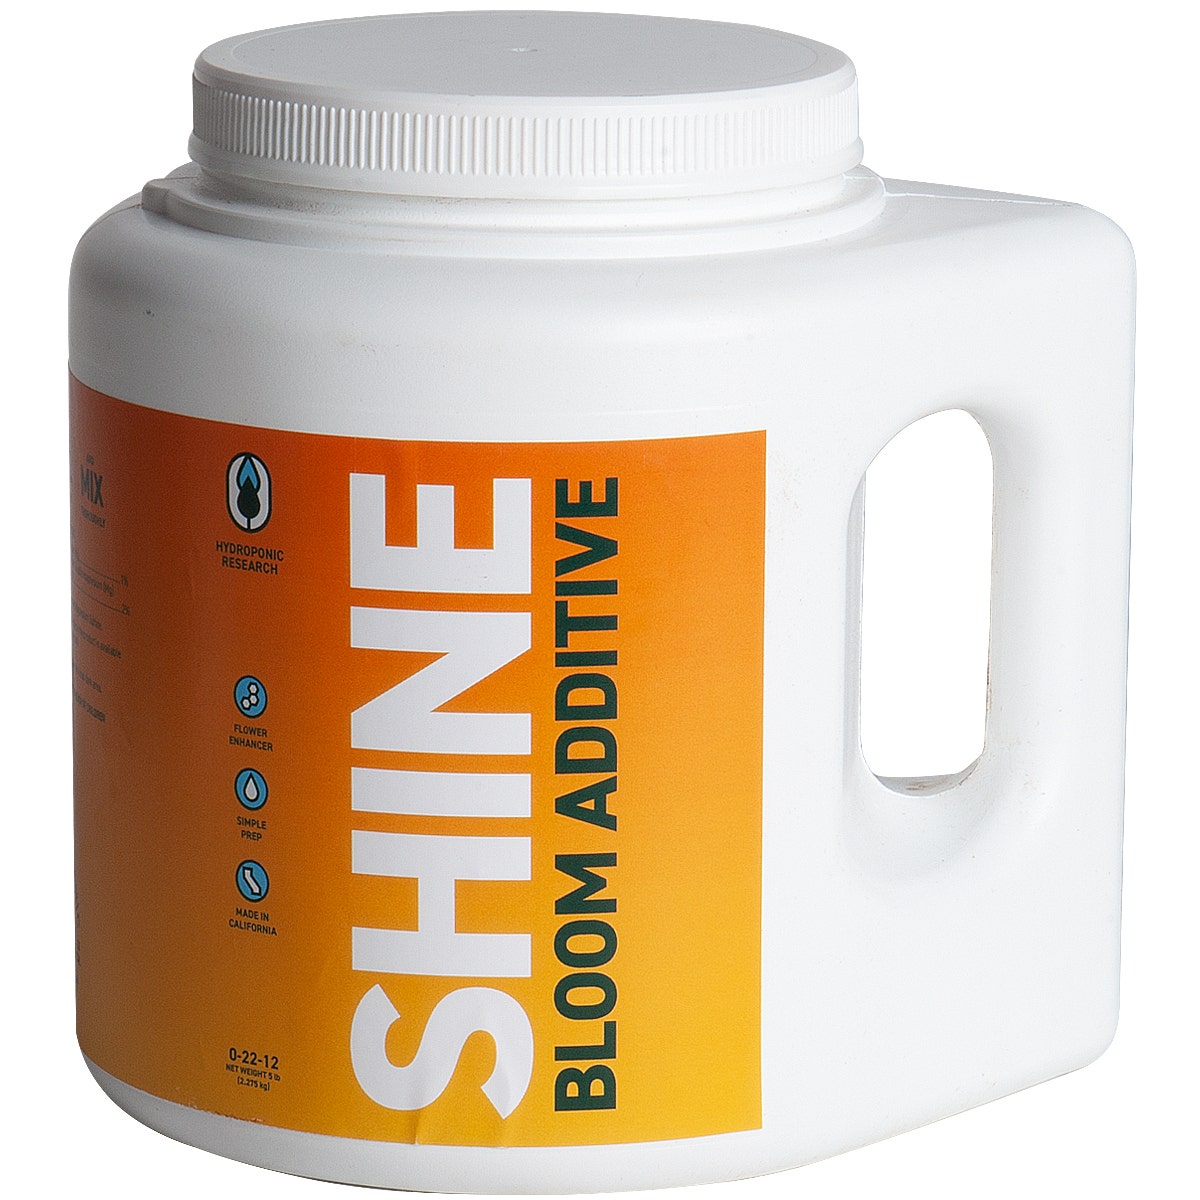 Veg+Bloom Shine PK and Bloom Booster